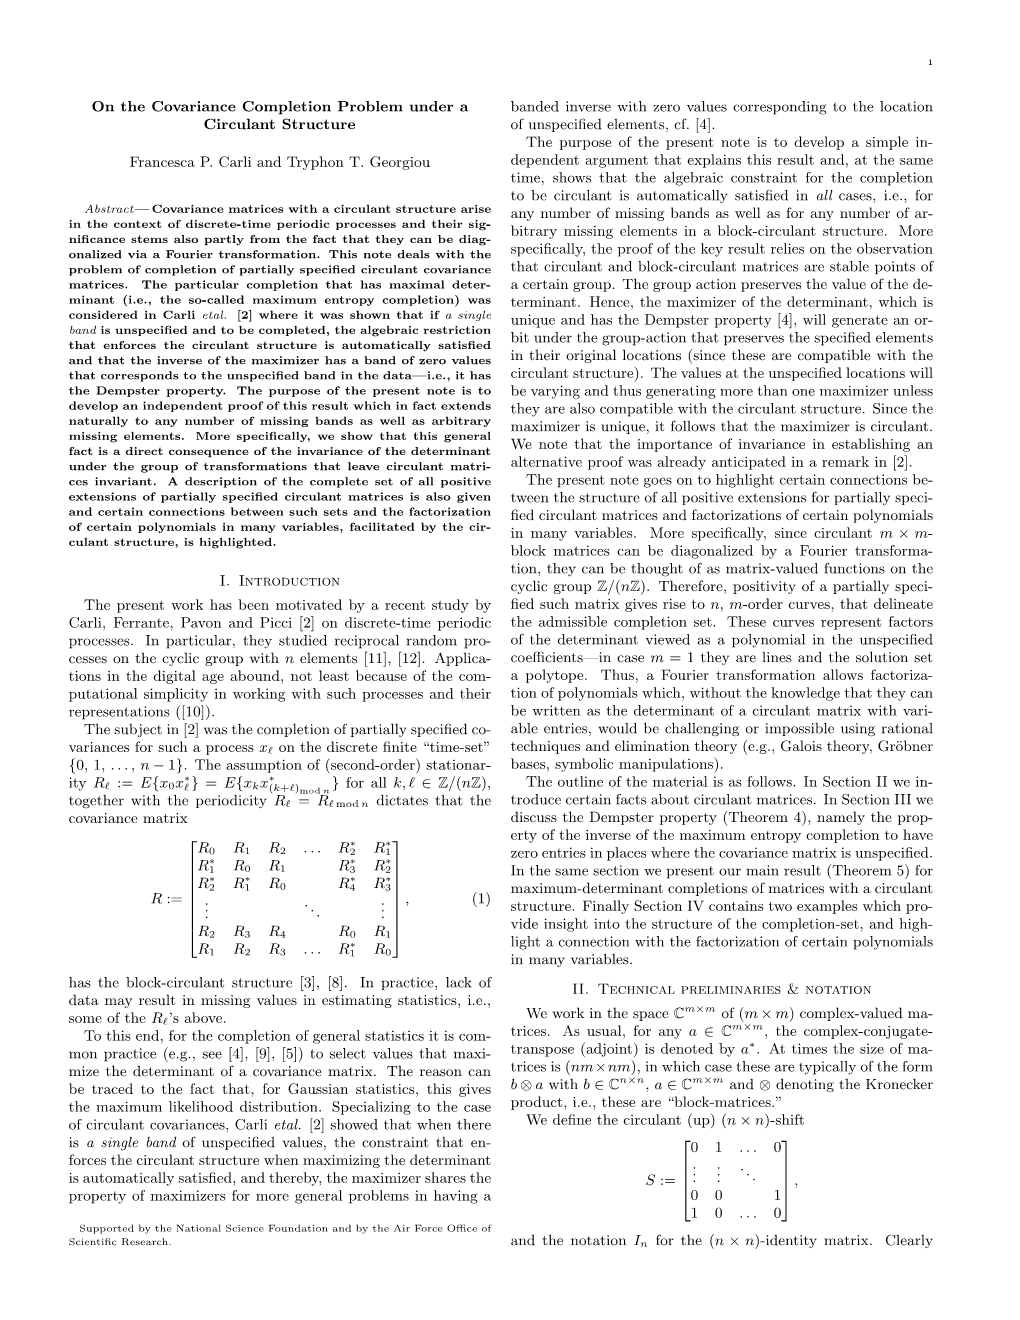 On the Covariance Completion Problem Under a Circulant Structure